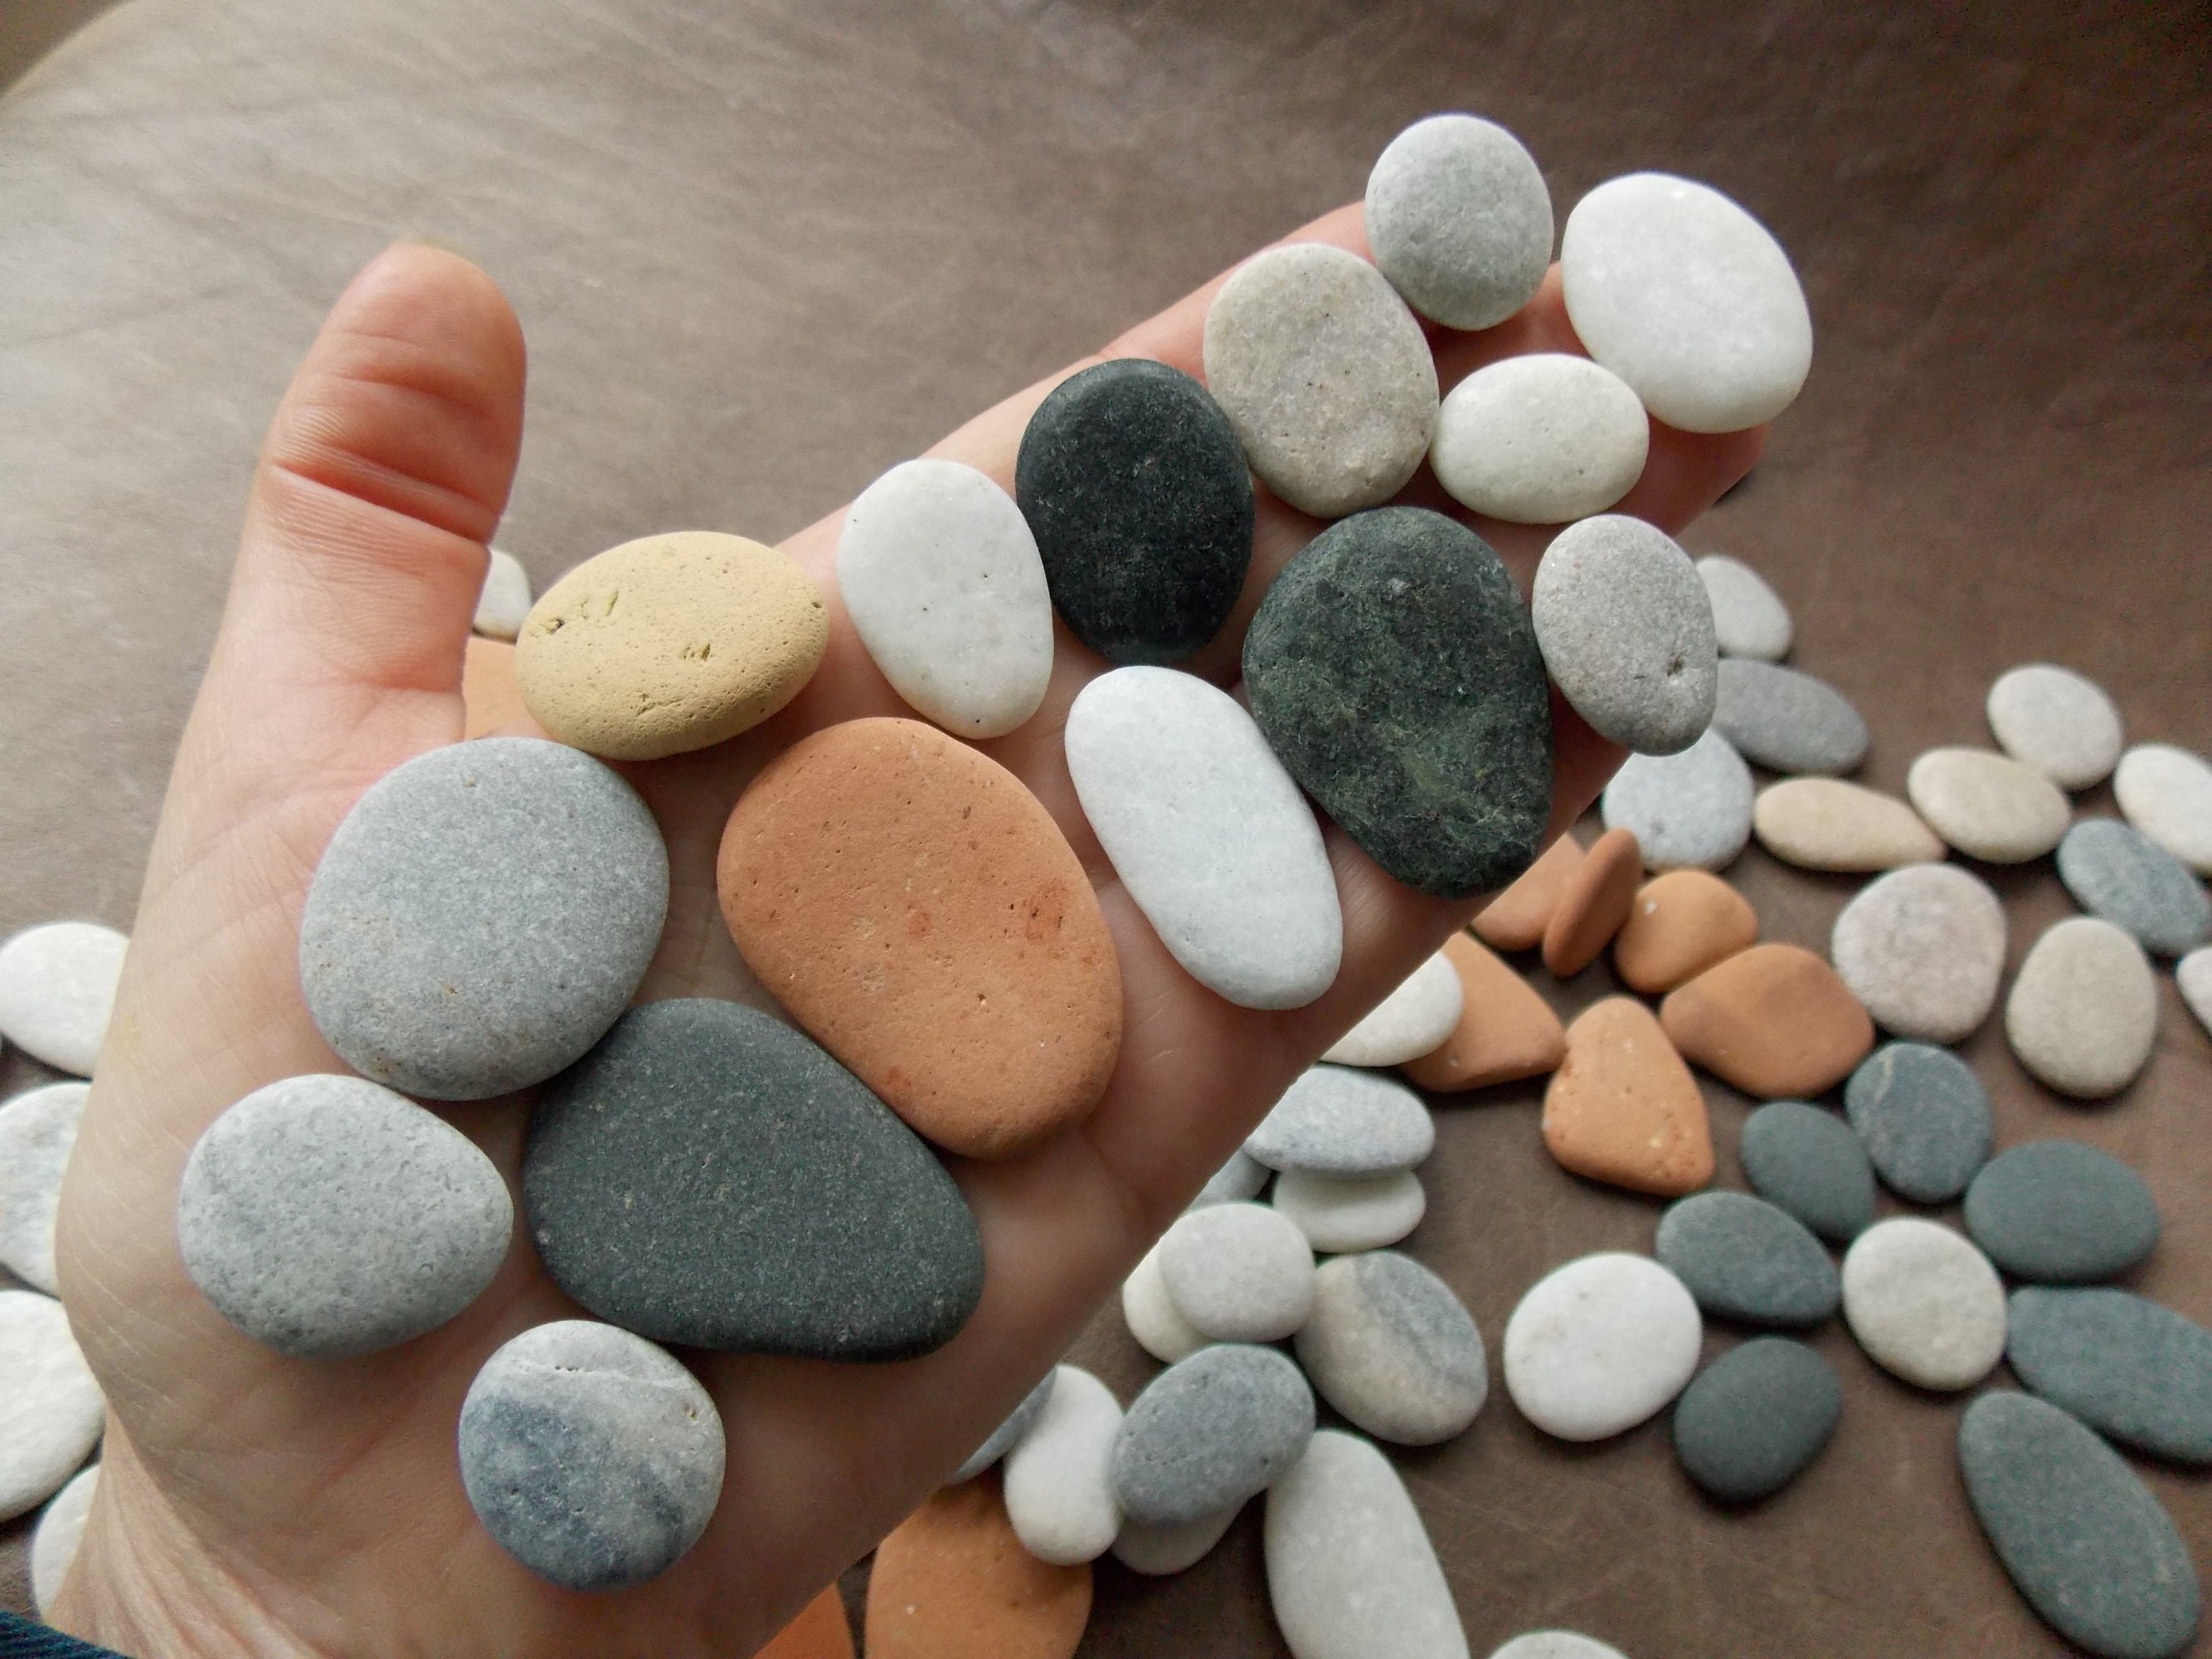 60 Smooth Flat Rock Pebbles for Pebble Art & Crafts.